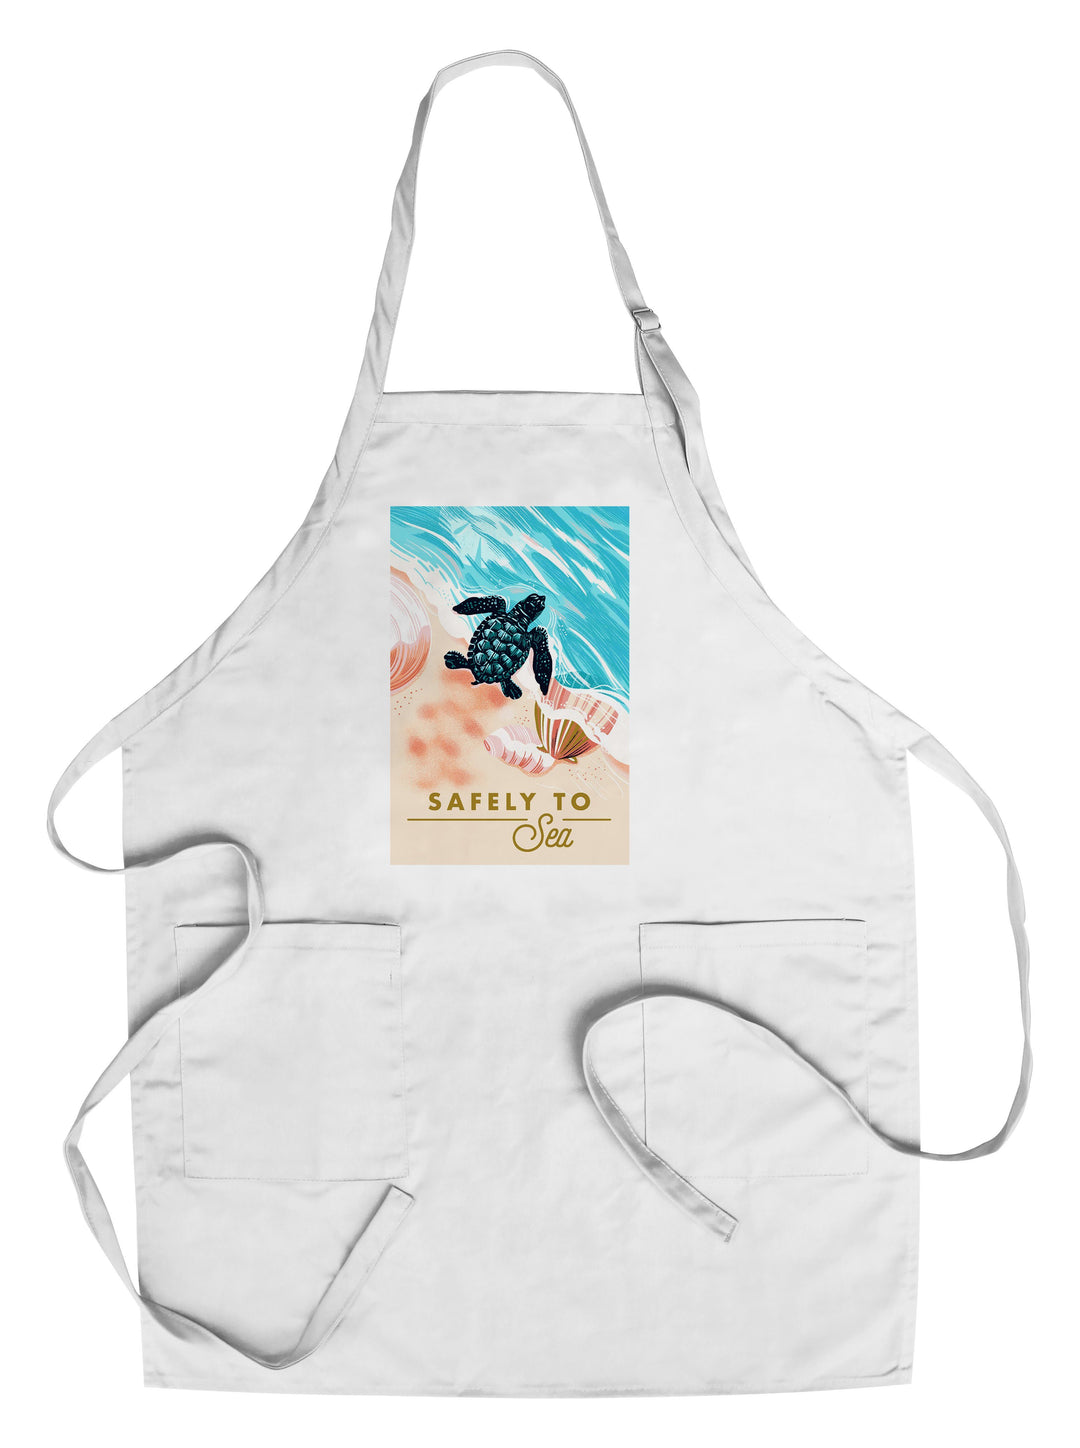 Courageous Explorer Collection, Turtle and Shells, Safely to Sea, Towels and Aprons Kitchen Lantern Press Chef's Apron 